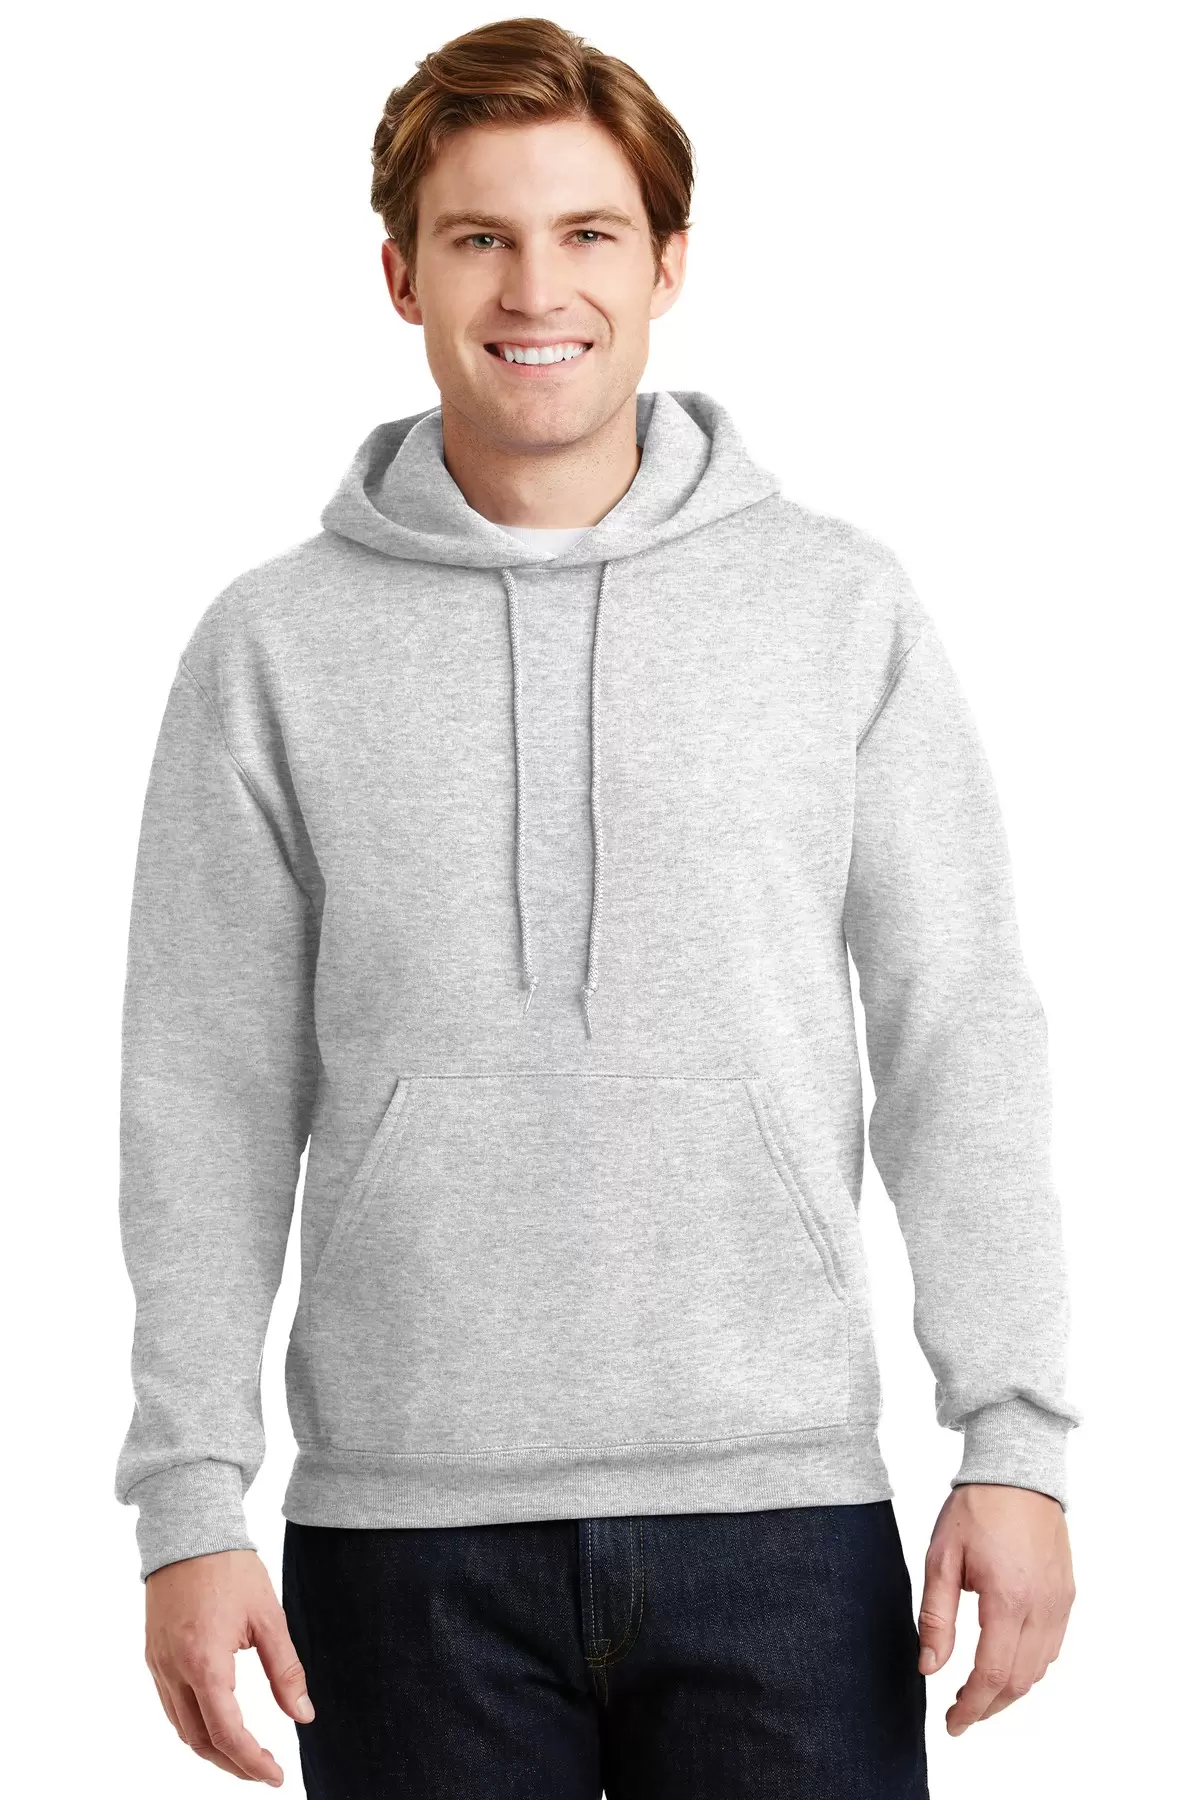 4997 Jerzees Adult Super Sweats® Hooded Pullover Sweatshirt - From $17.55